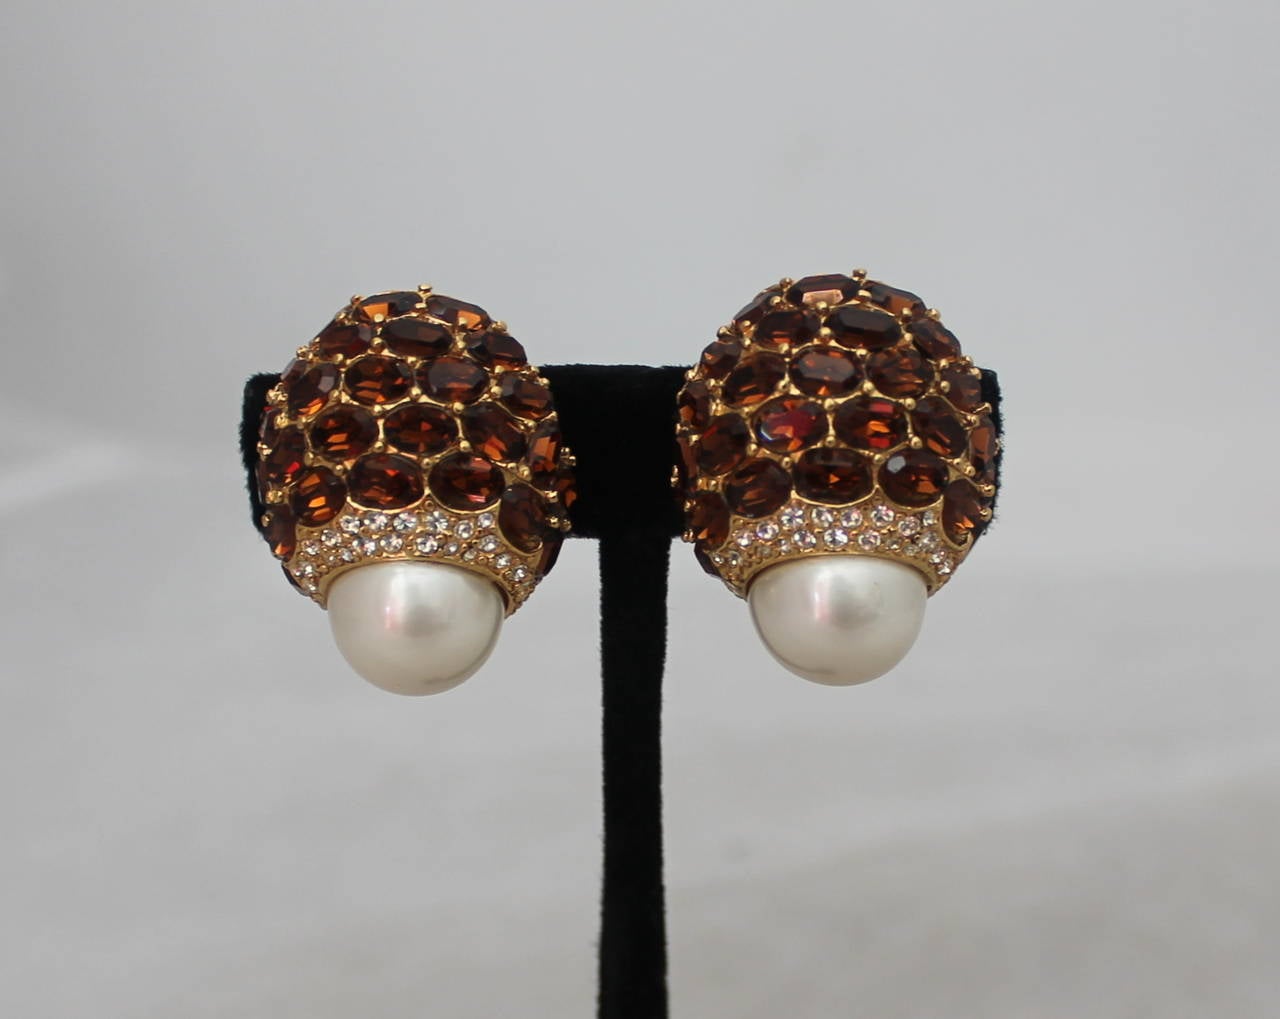 Ciner 1990s Goldtone with Amber Colored Stones, Rhinestones, and Large Pearl Clip on Earrings. These Earrings are in Excellent Condition.

Measurements:
Length: 1.35 